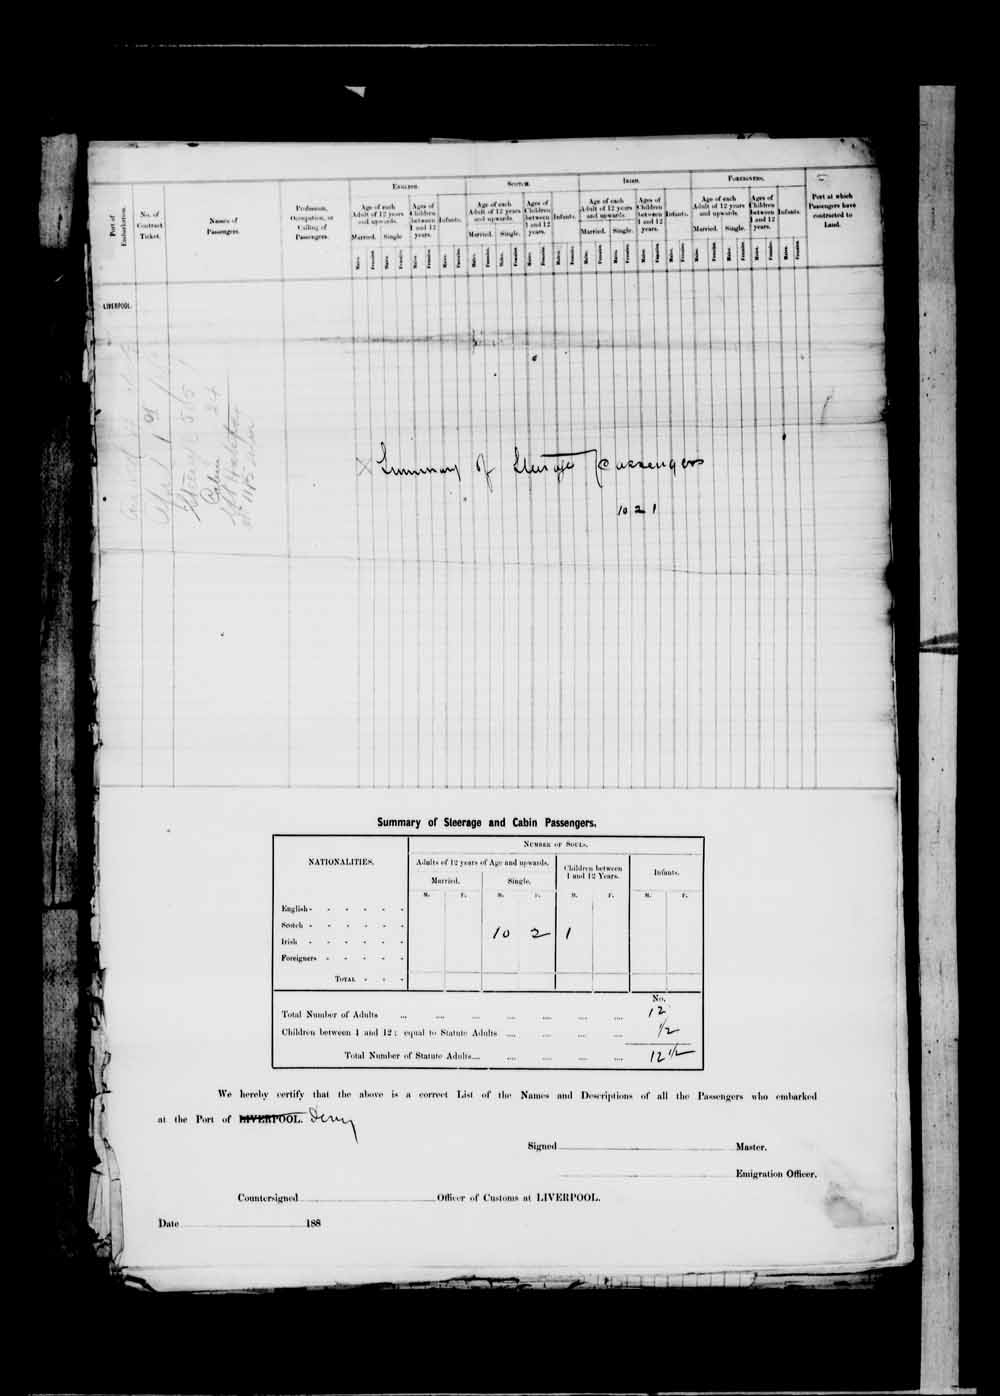 Digitized page of Passenger Lists for Image No.: e003674496